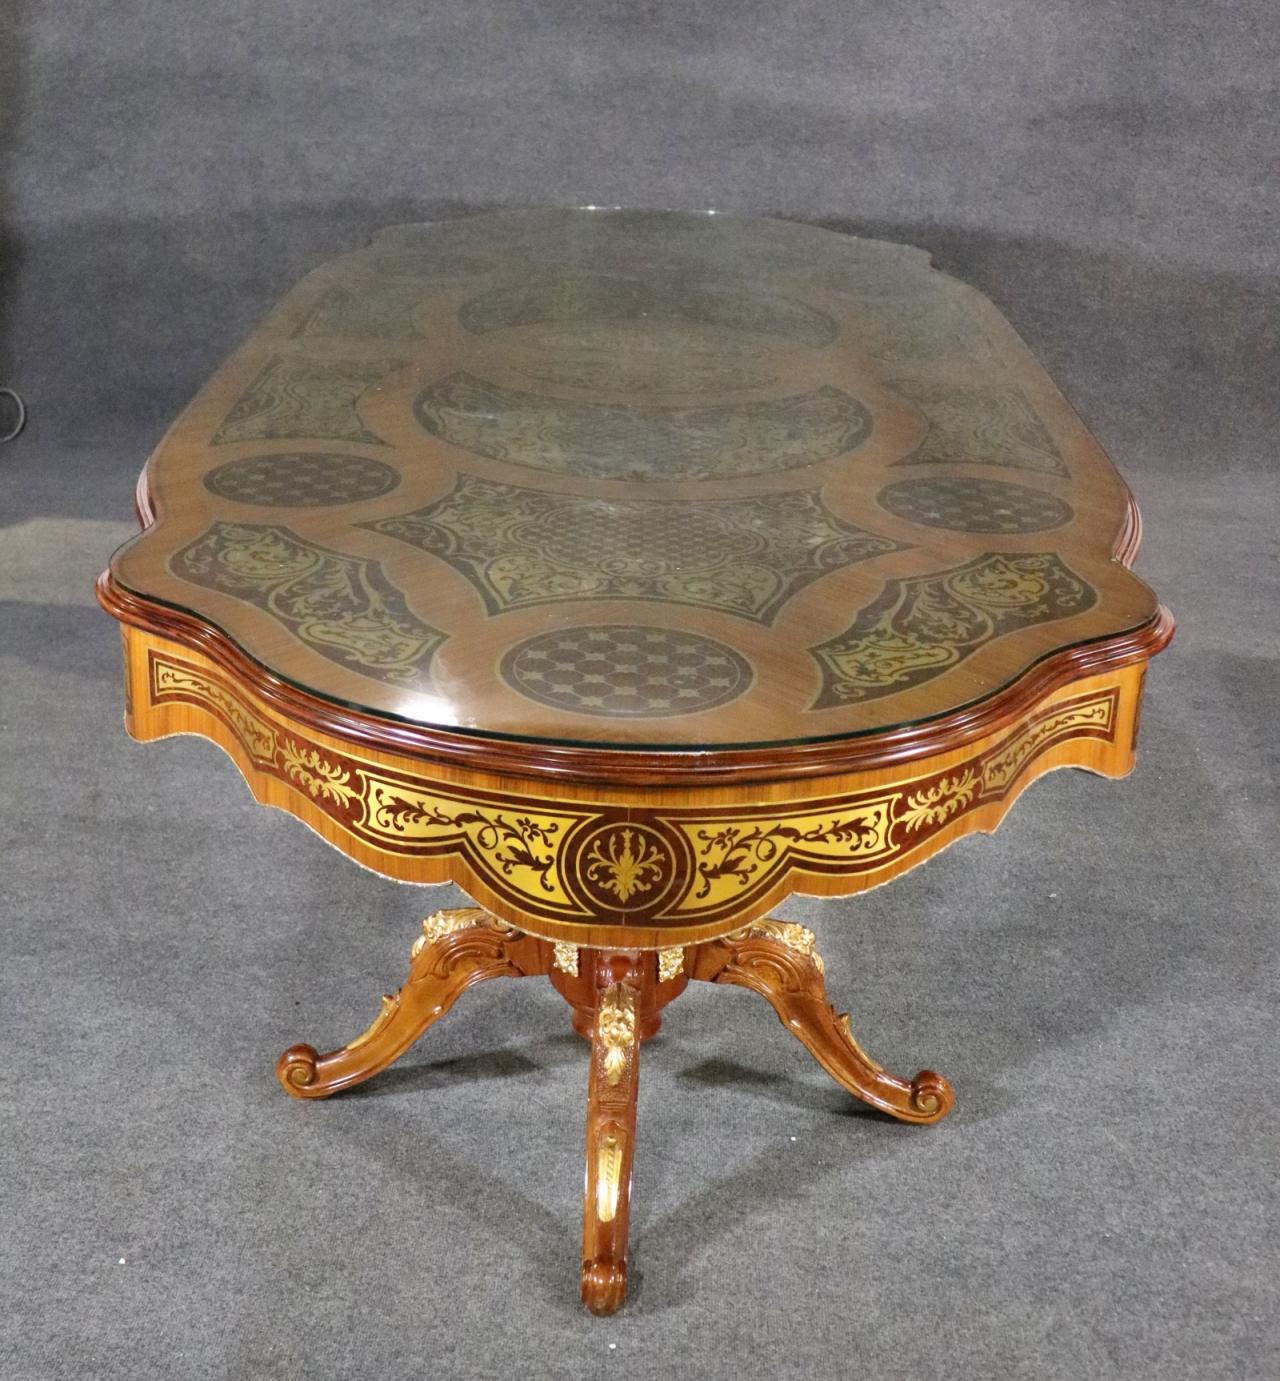 This is a spectacular brass inlaid dining table in the style of Andre Boulle of France. The brass inlaid surfaces are not damaged or lifting as these often do. The table has a small chip in the glass which can be polished out and minimized if you